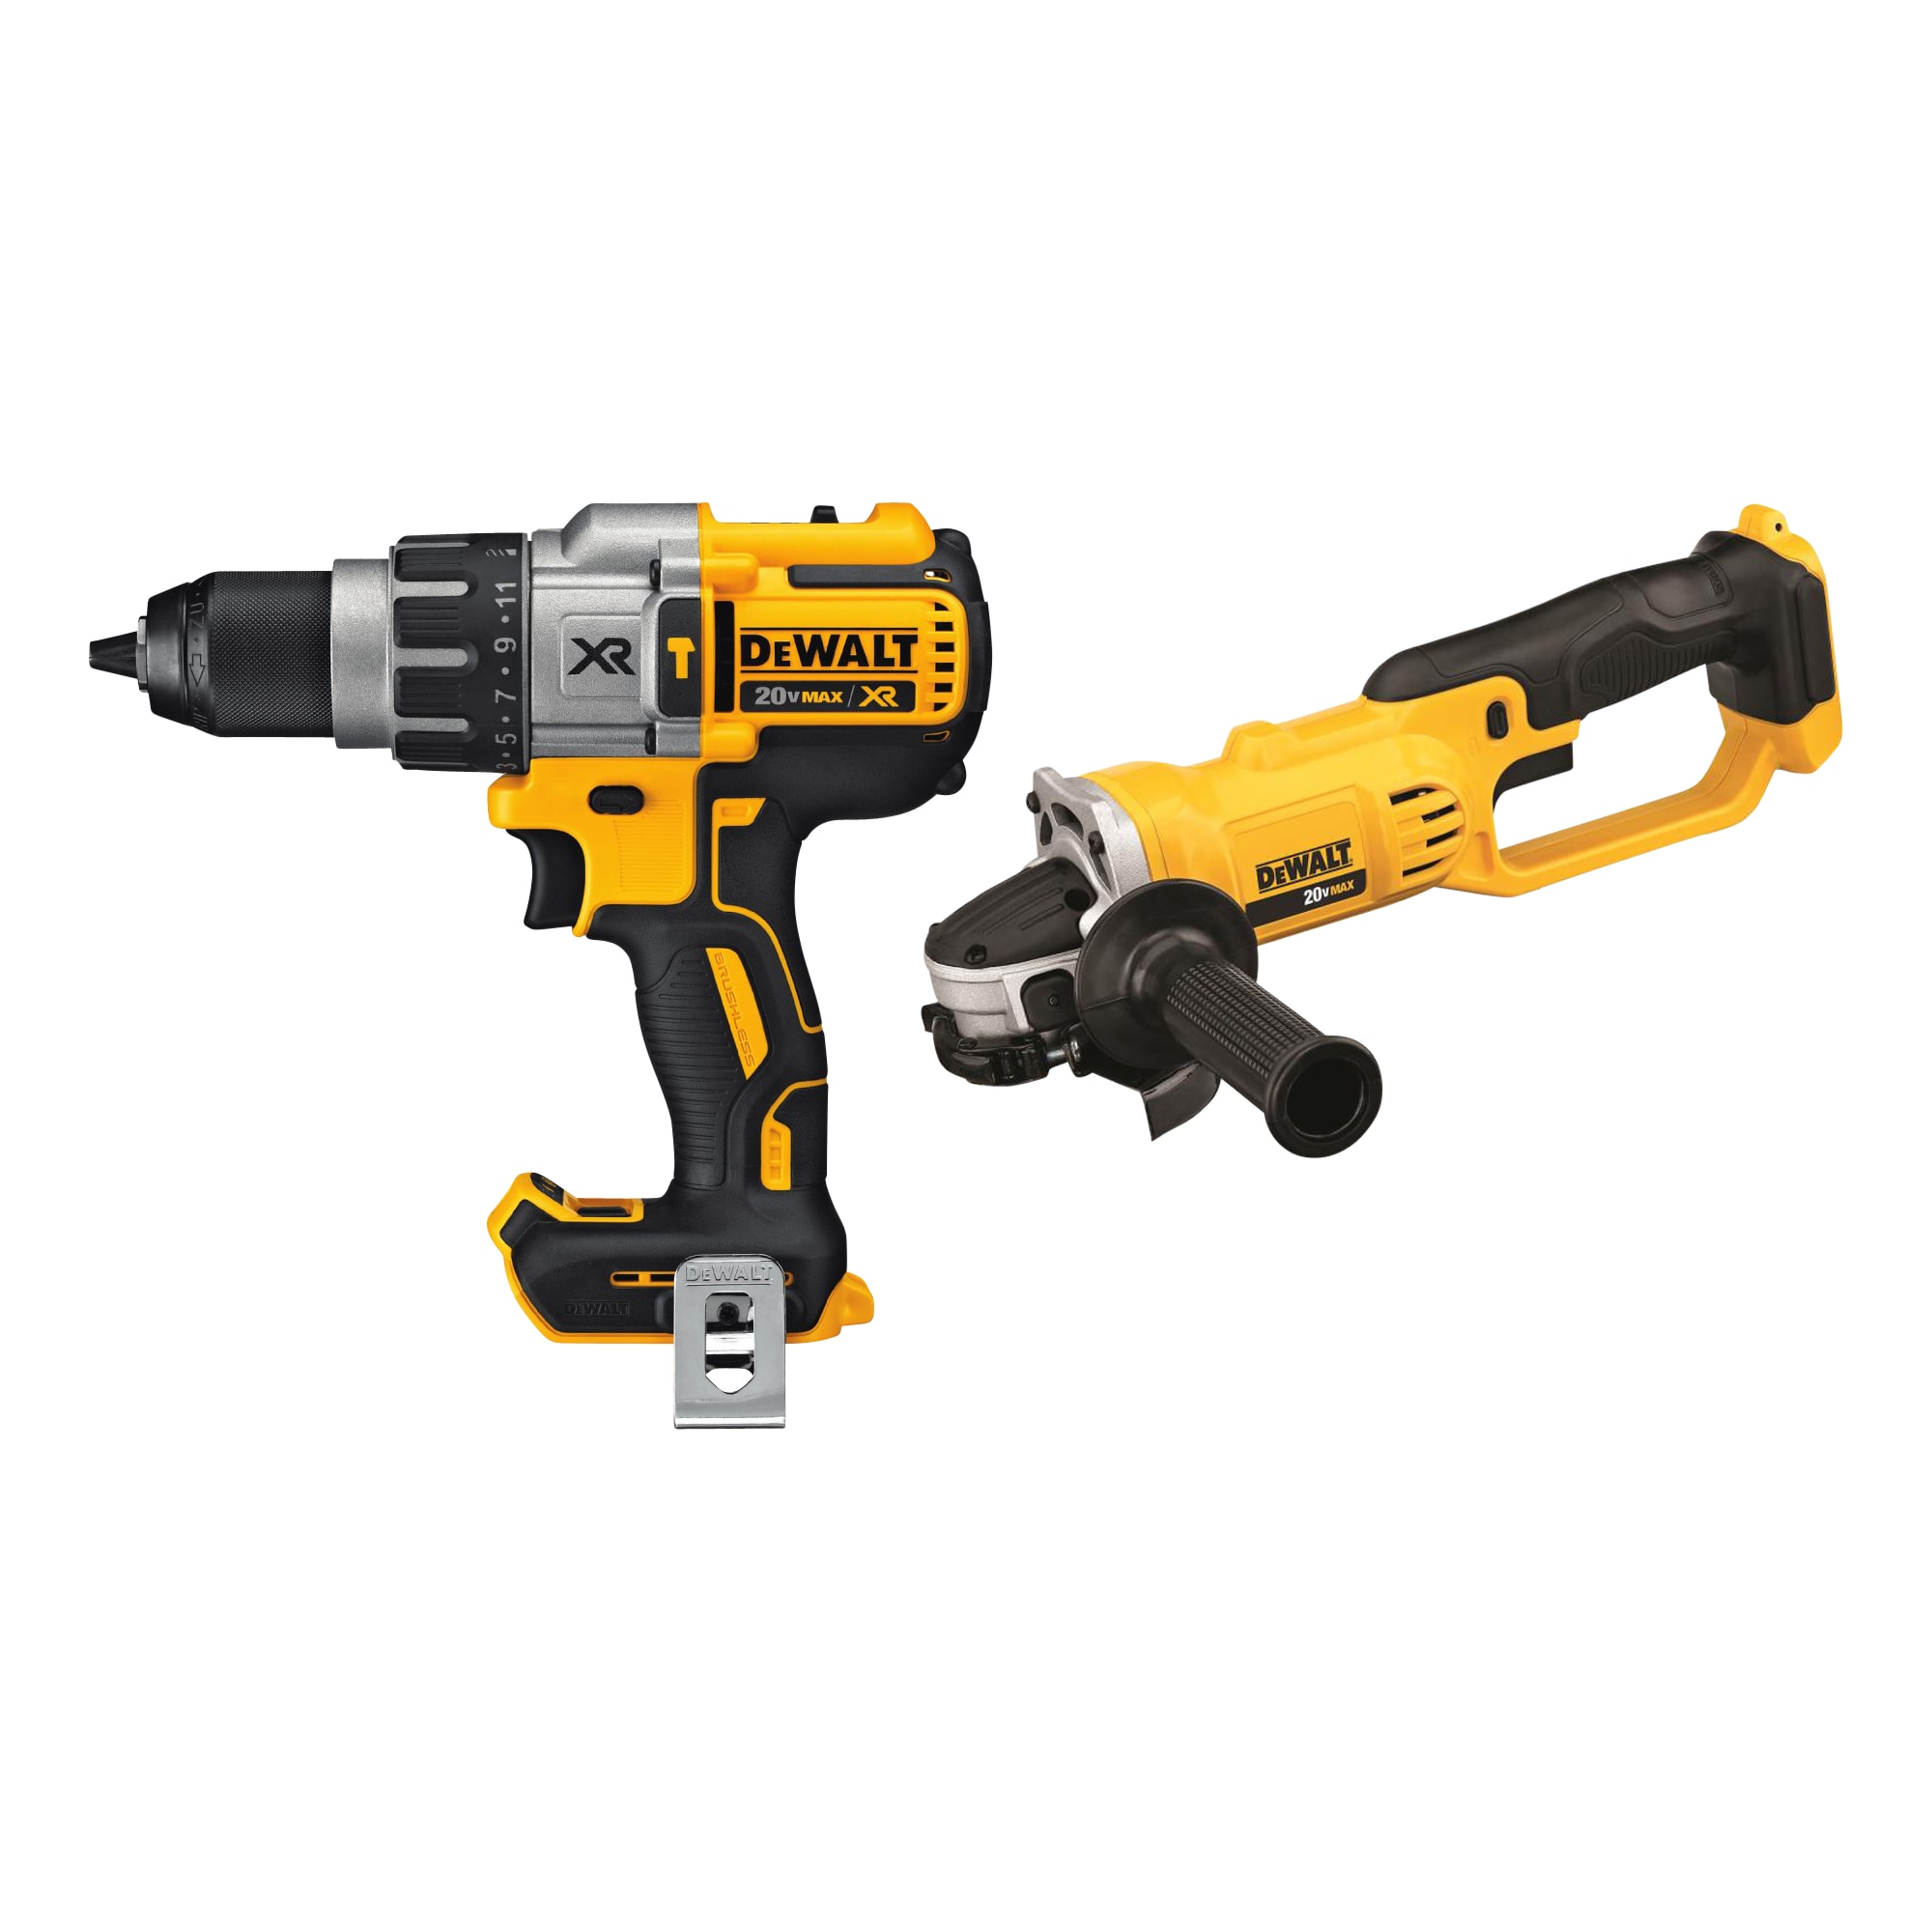 DEWALT XR POWER DETECT 1/2-in 20-volt Max 8-Amp Variable Speed Brushless Cordless Hammer Drill (Tool Only) & 4.5-in 20-Volt Trigger Switch Cordless